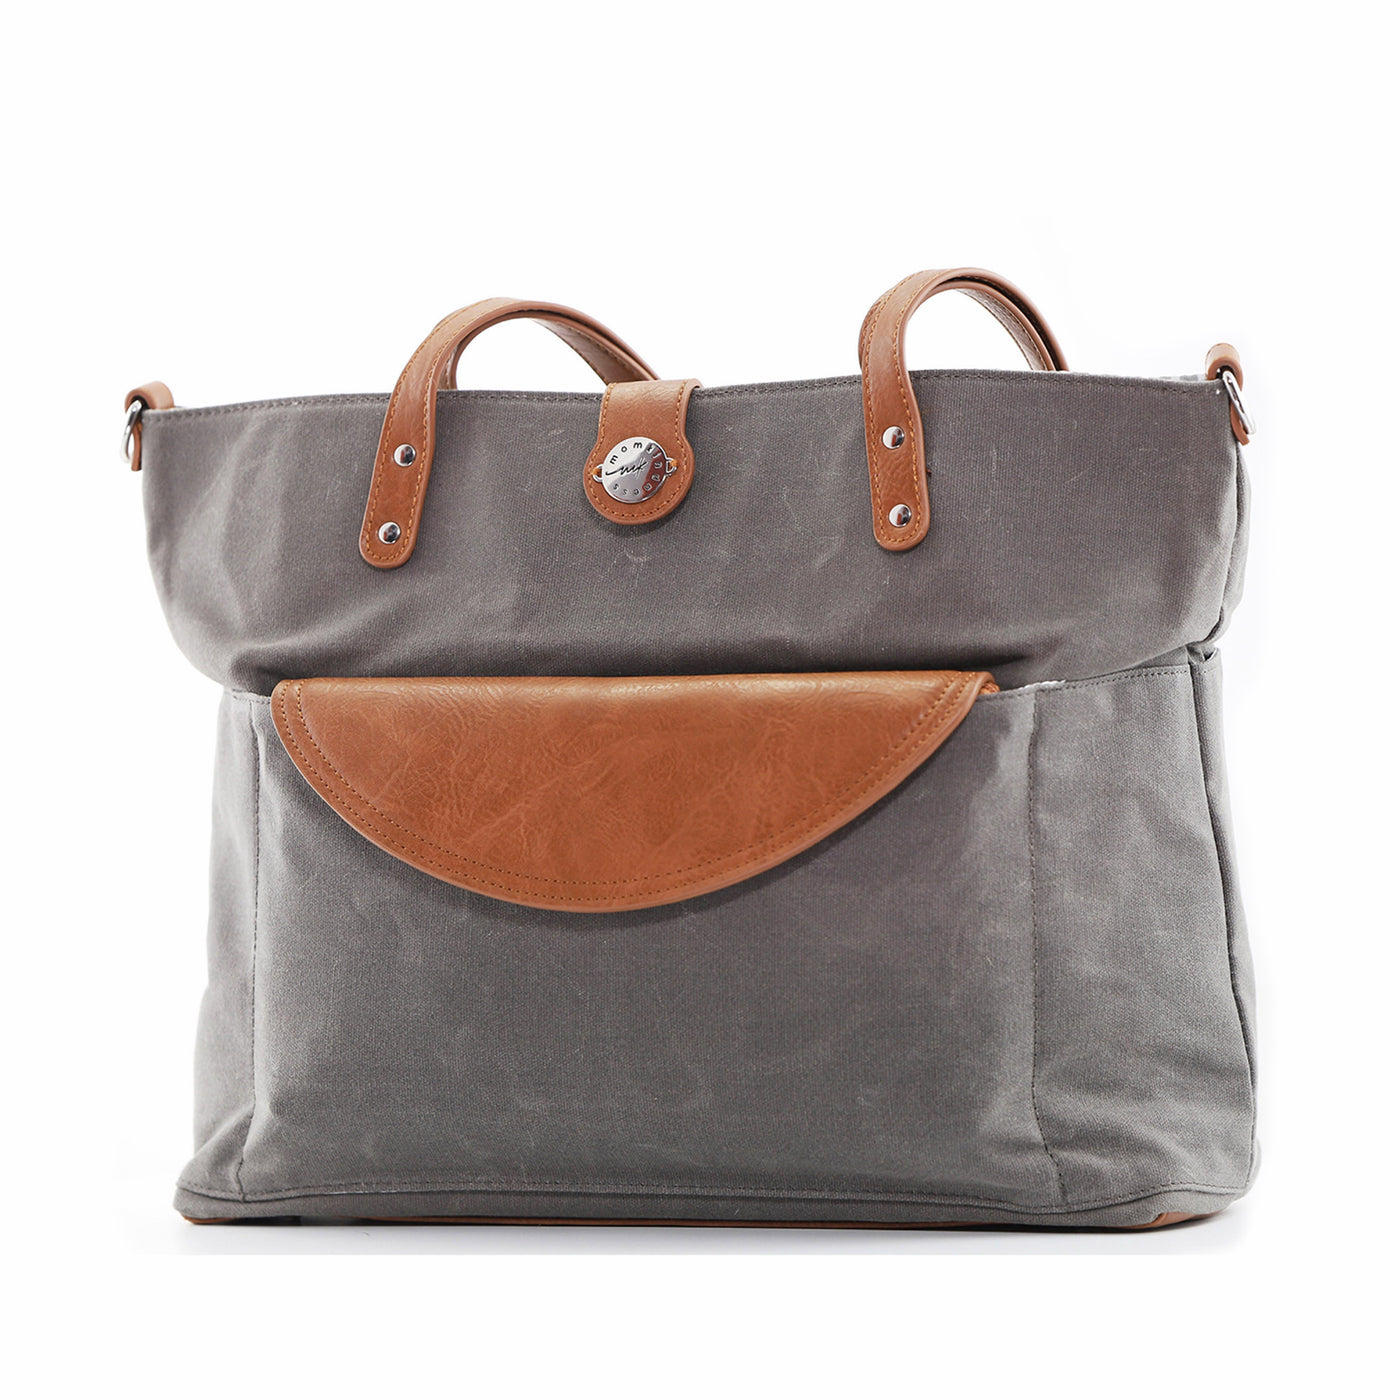 Grey waxed canvas tote with brown vegan leather accents and clutch tucked in front pocket, shown on white background.